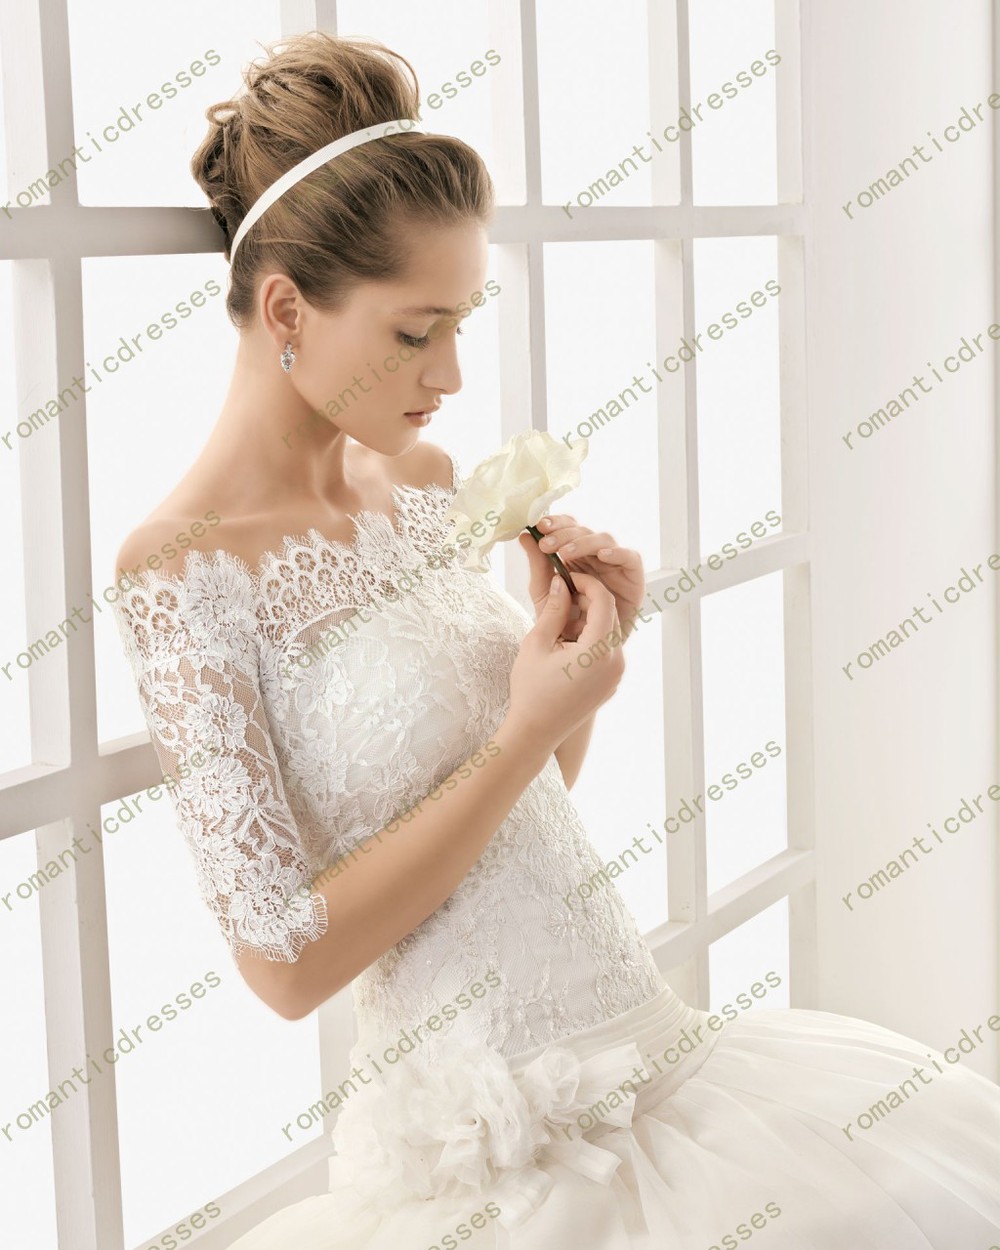 Custom made Lace See Through Half Sleeve Off Shoulder Wedding Jackets 2013New Free Shipping wedding accessory